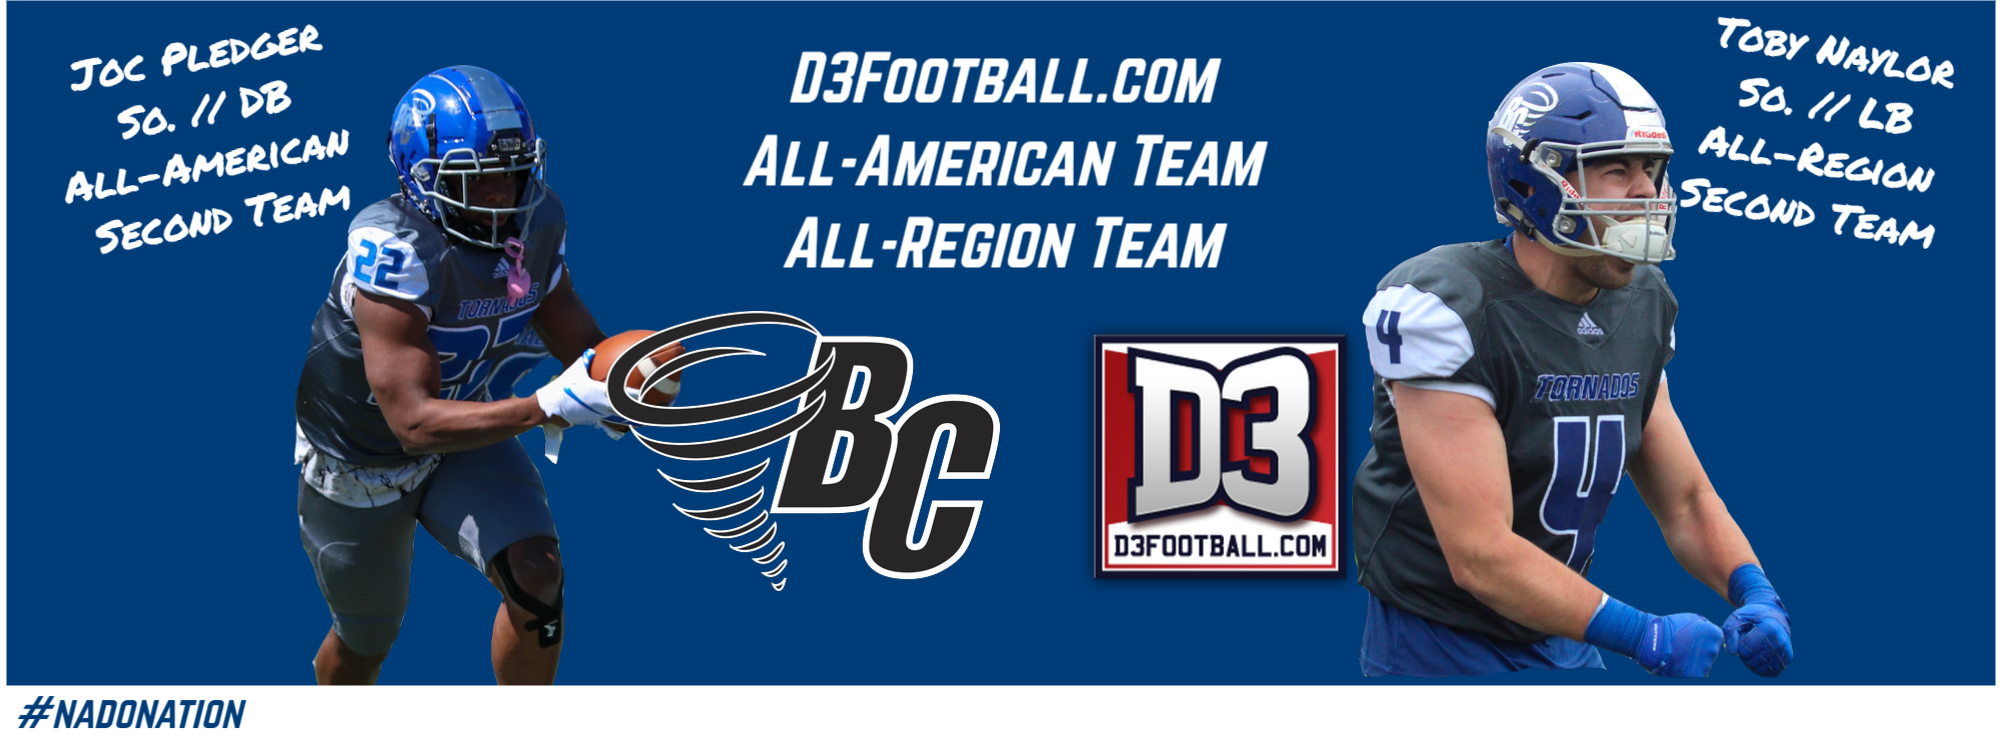 Pledger Becomes BC’s First DIII-Era All-American; Naylor Selected to D3football.com’s All-Region Squad